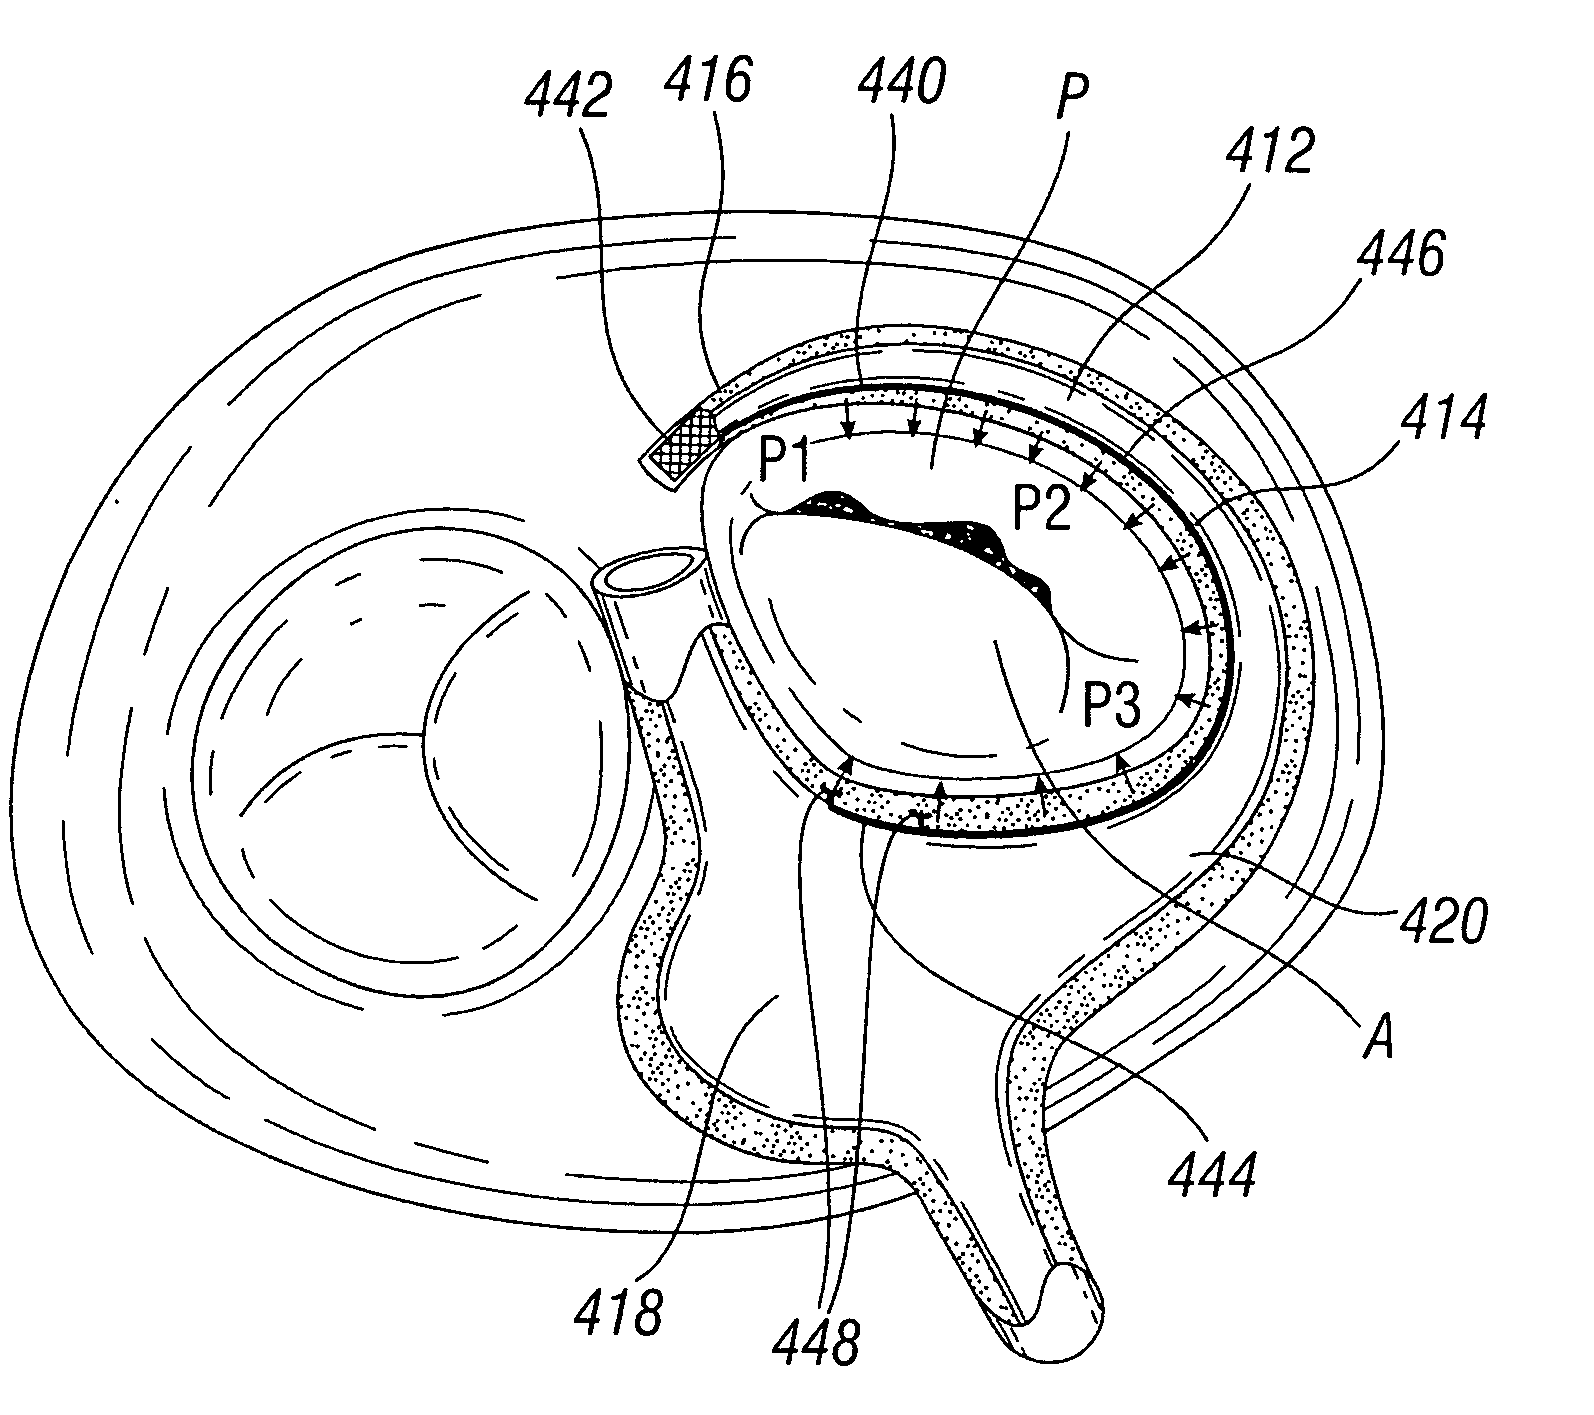 Device and method for mitral valve repair